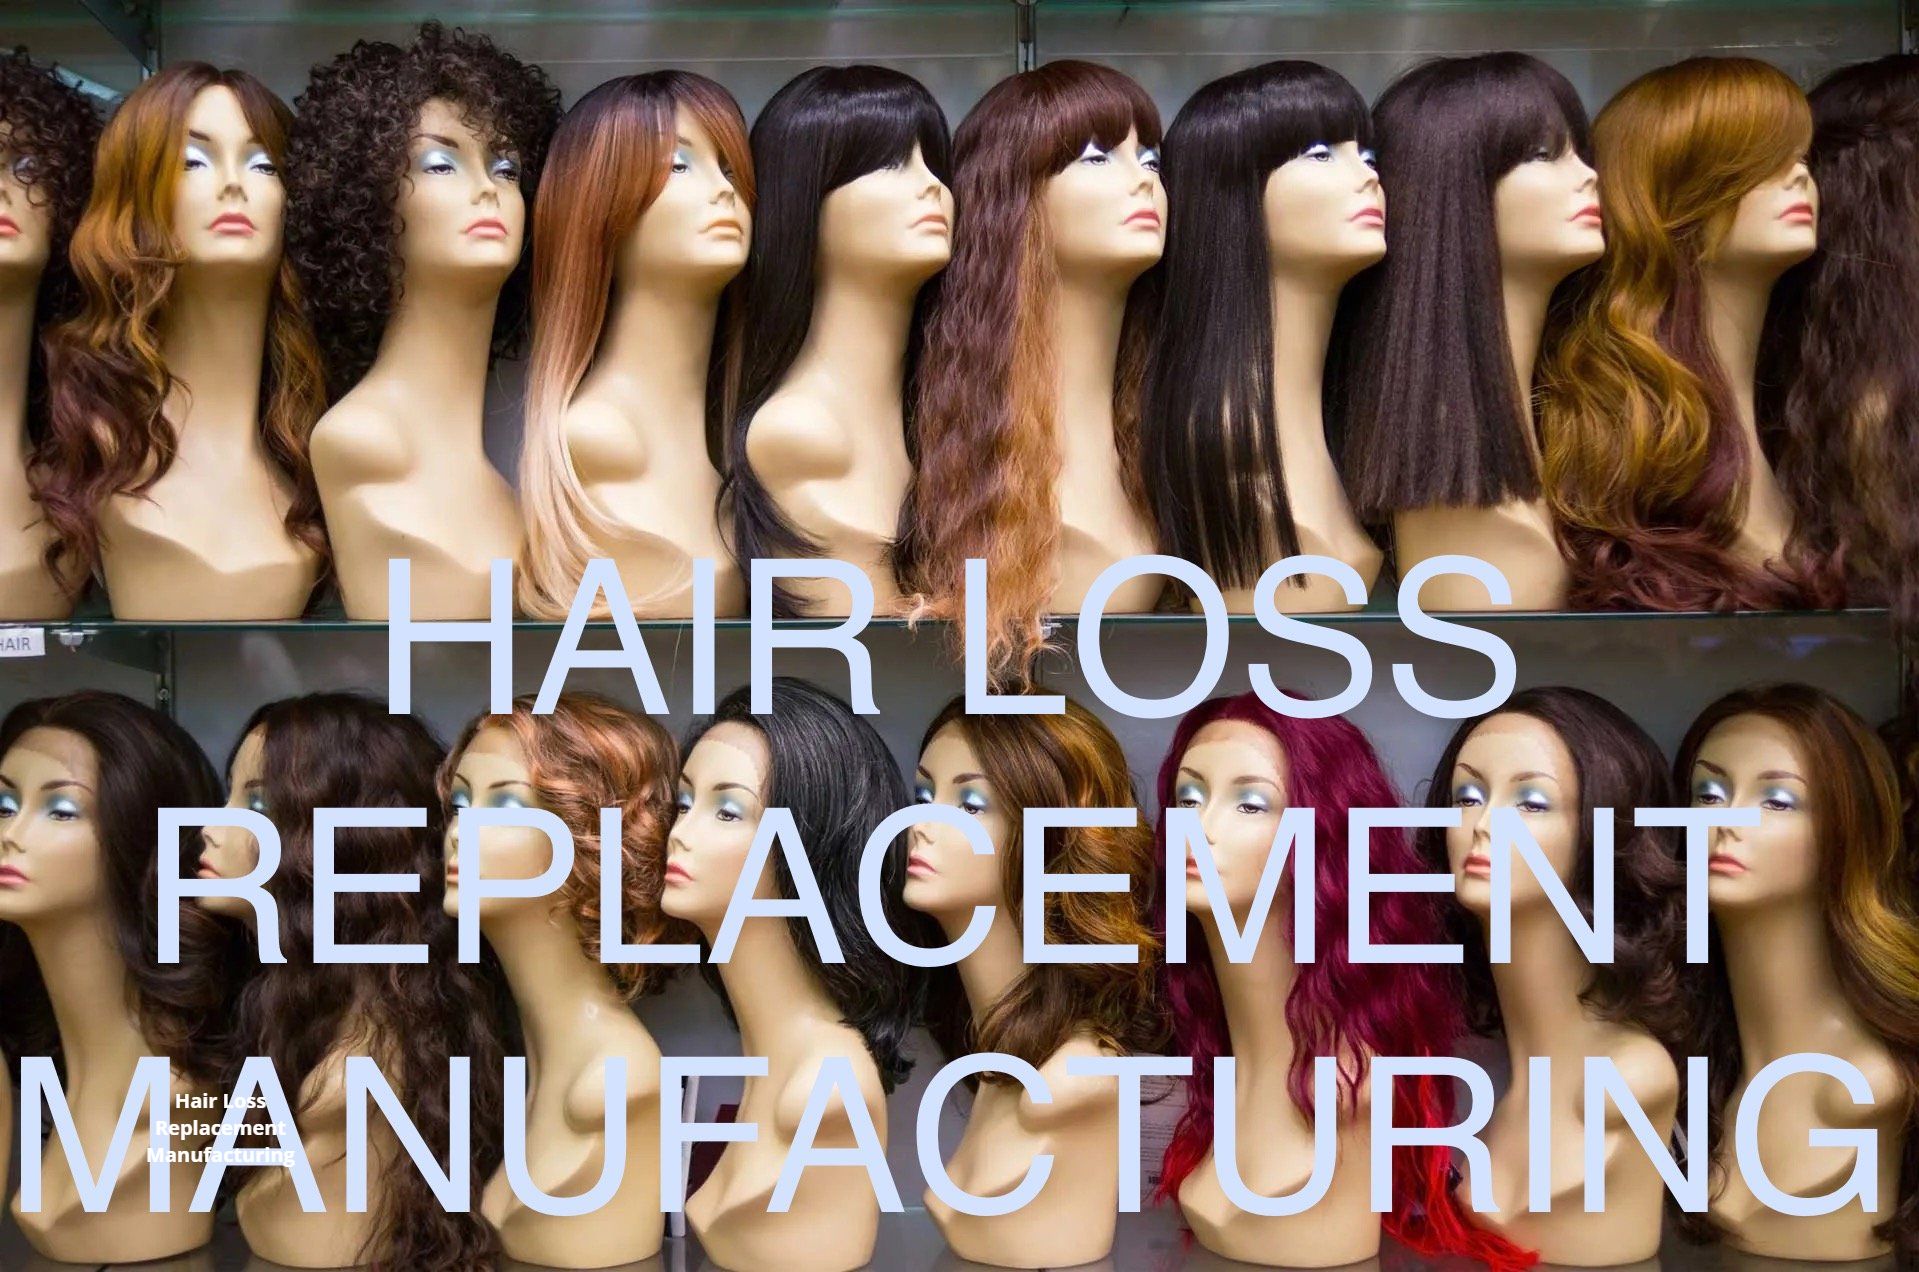 Hair loss replacement manufacturing